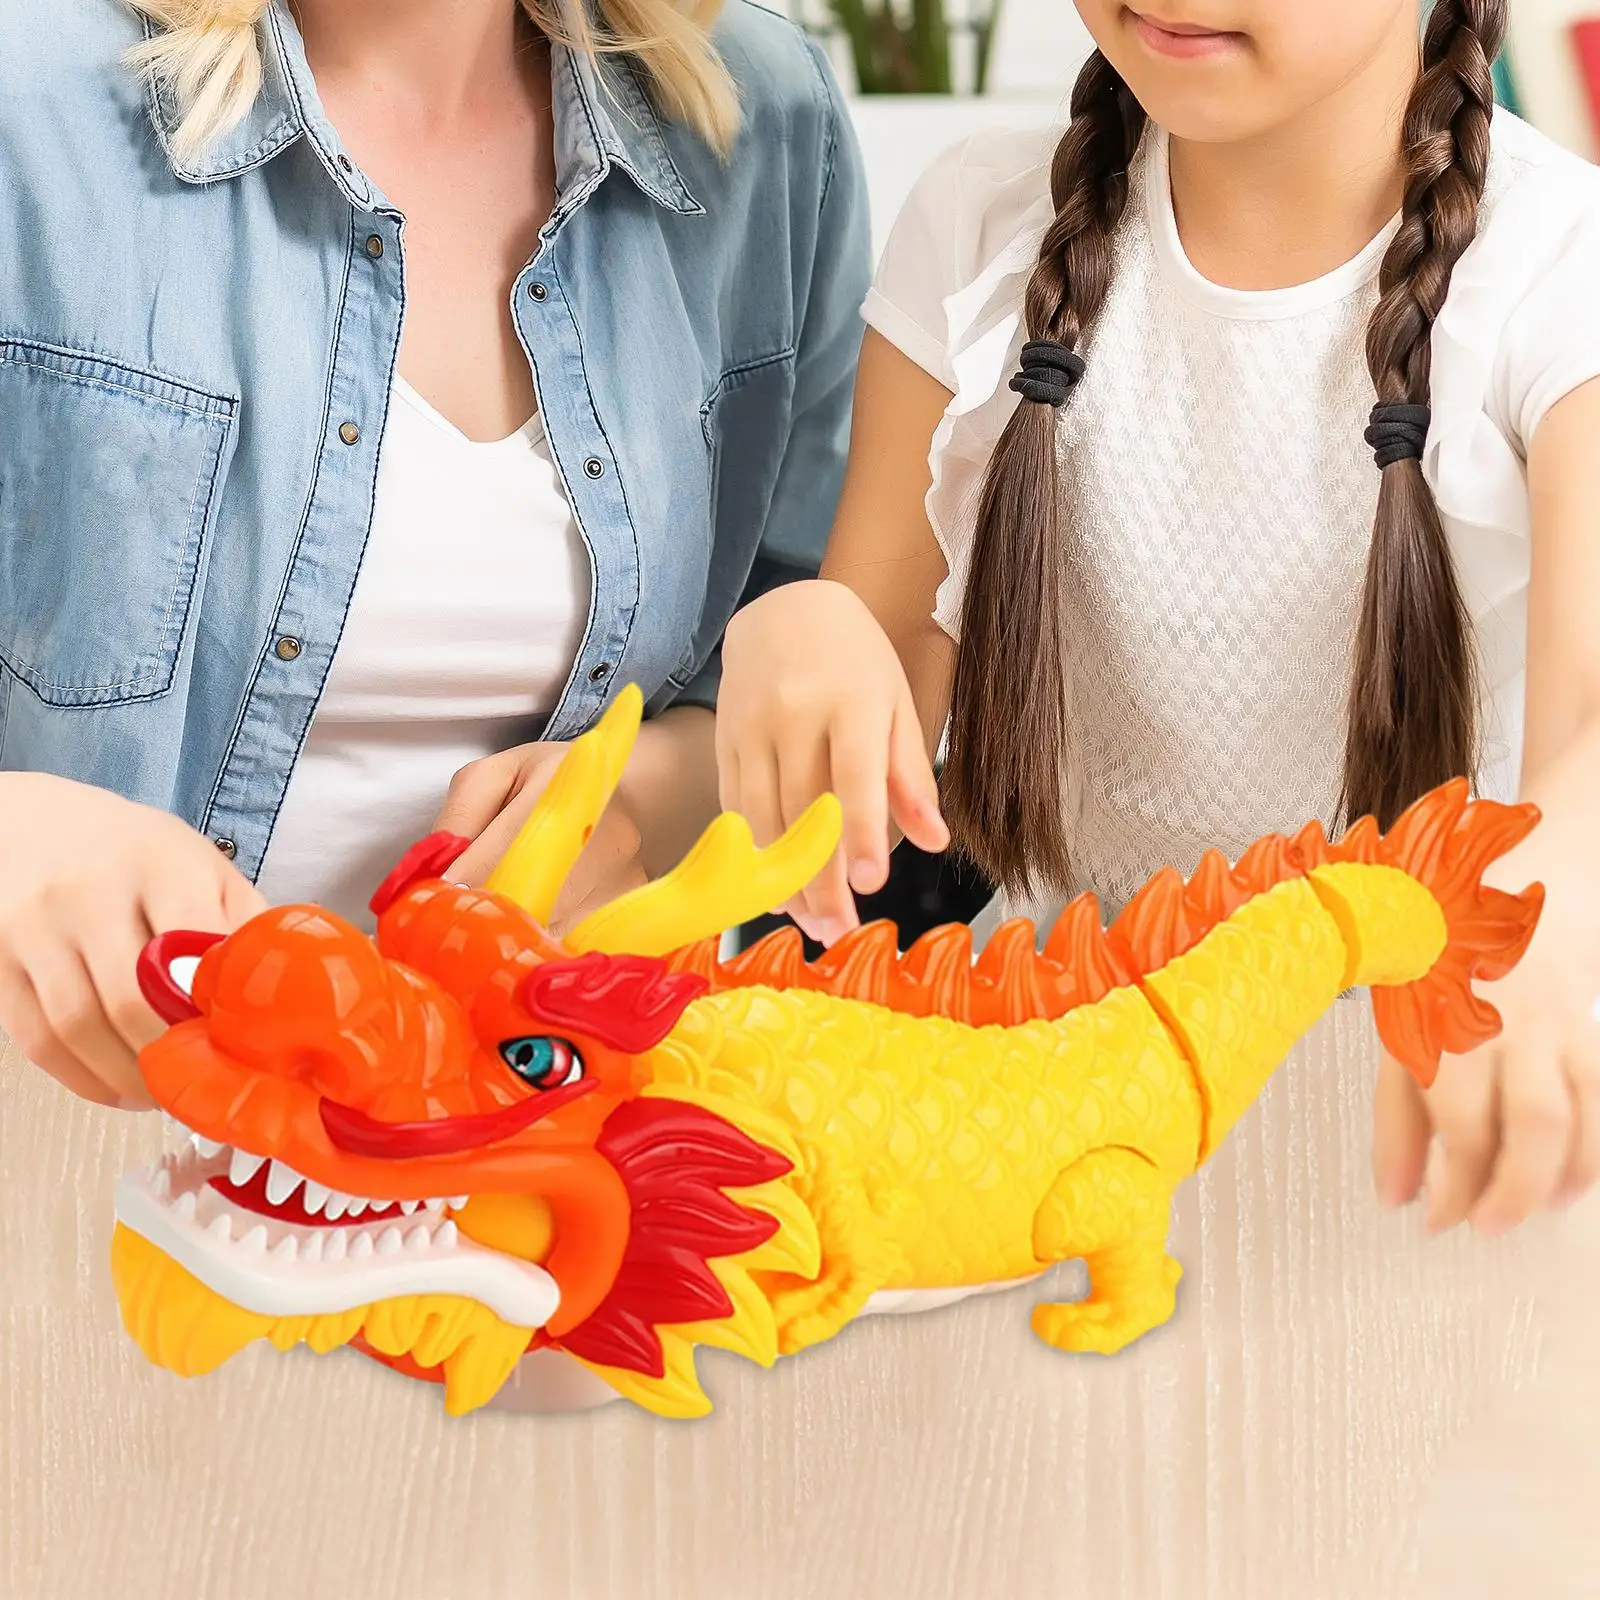 Eletric Dragon Toy Walking Gifts Outdoor Realistic Mechanical Creative Animal Flexible for Girls Children Boys Kid Age 8-12